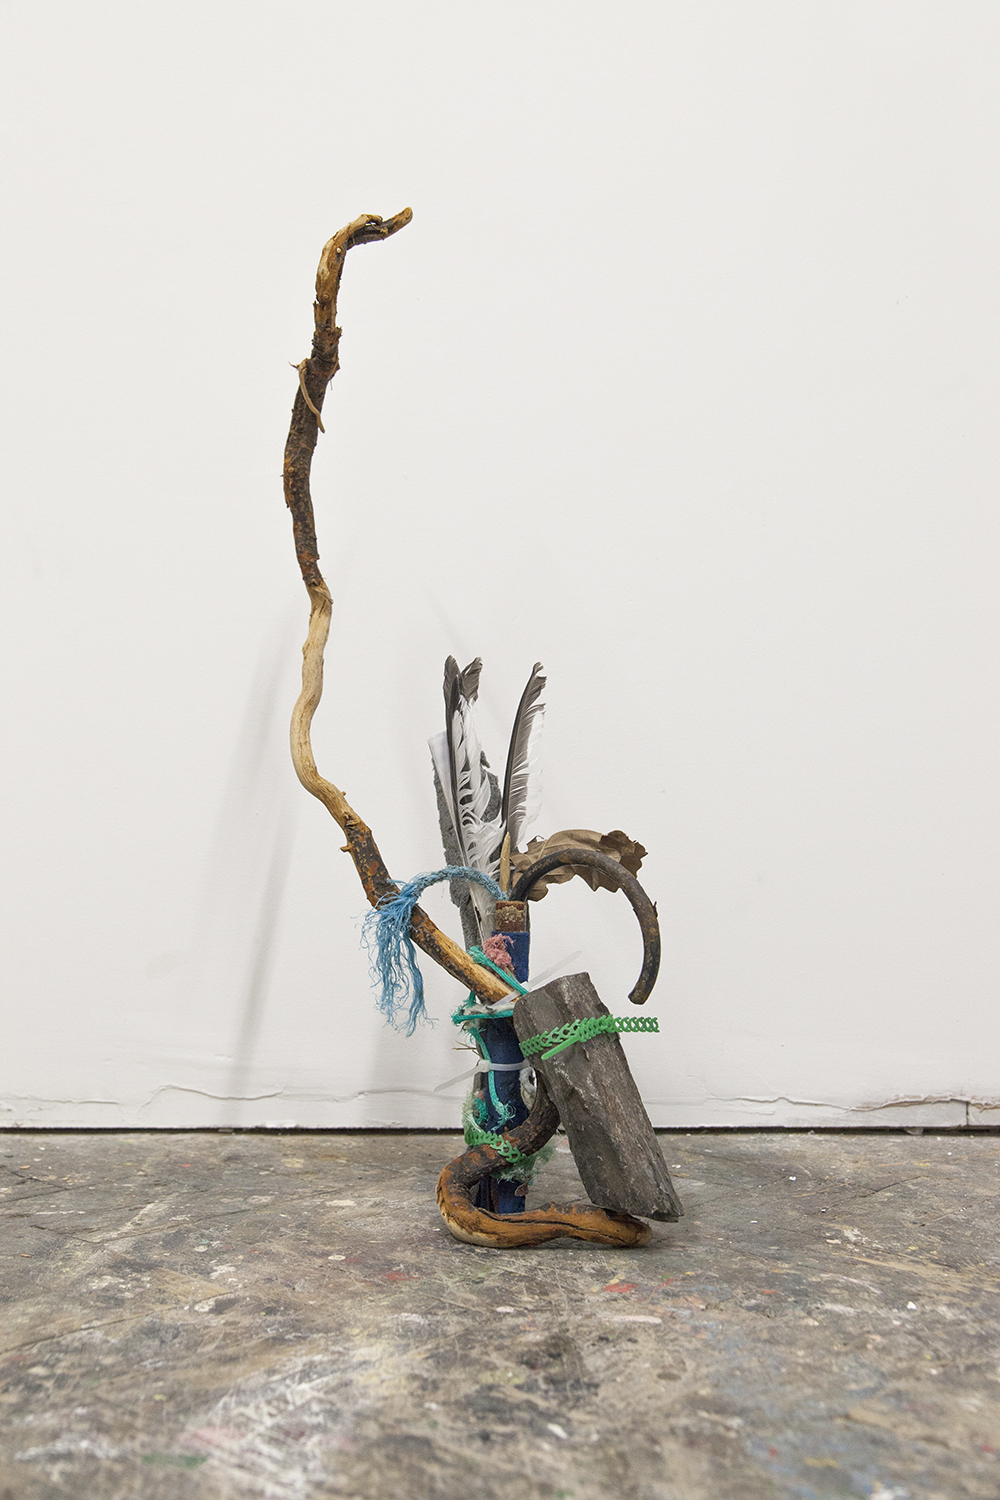 Clump — Driftwood, stone, iron, rope, feathers, rubber, plastic, foam, dead leaf